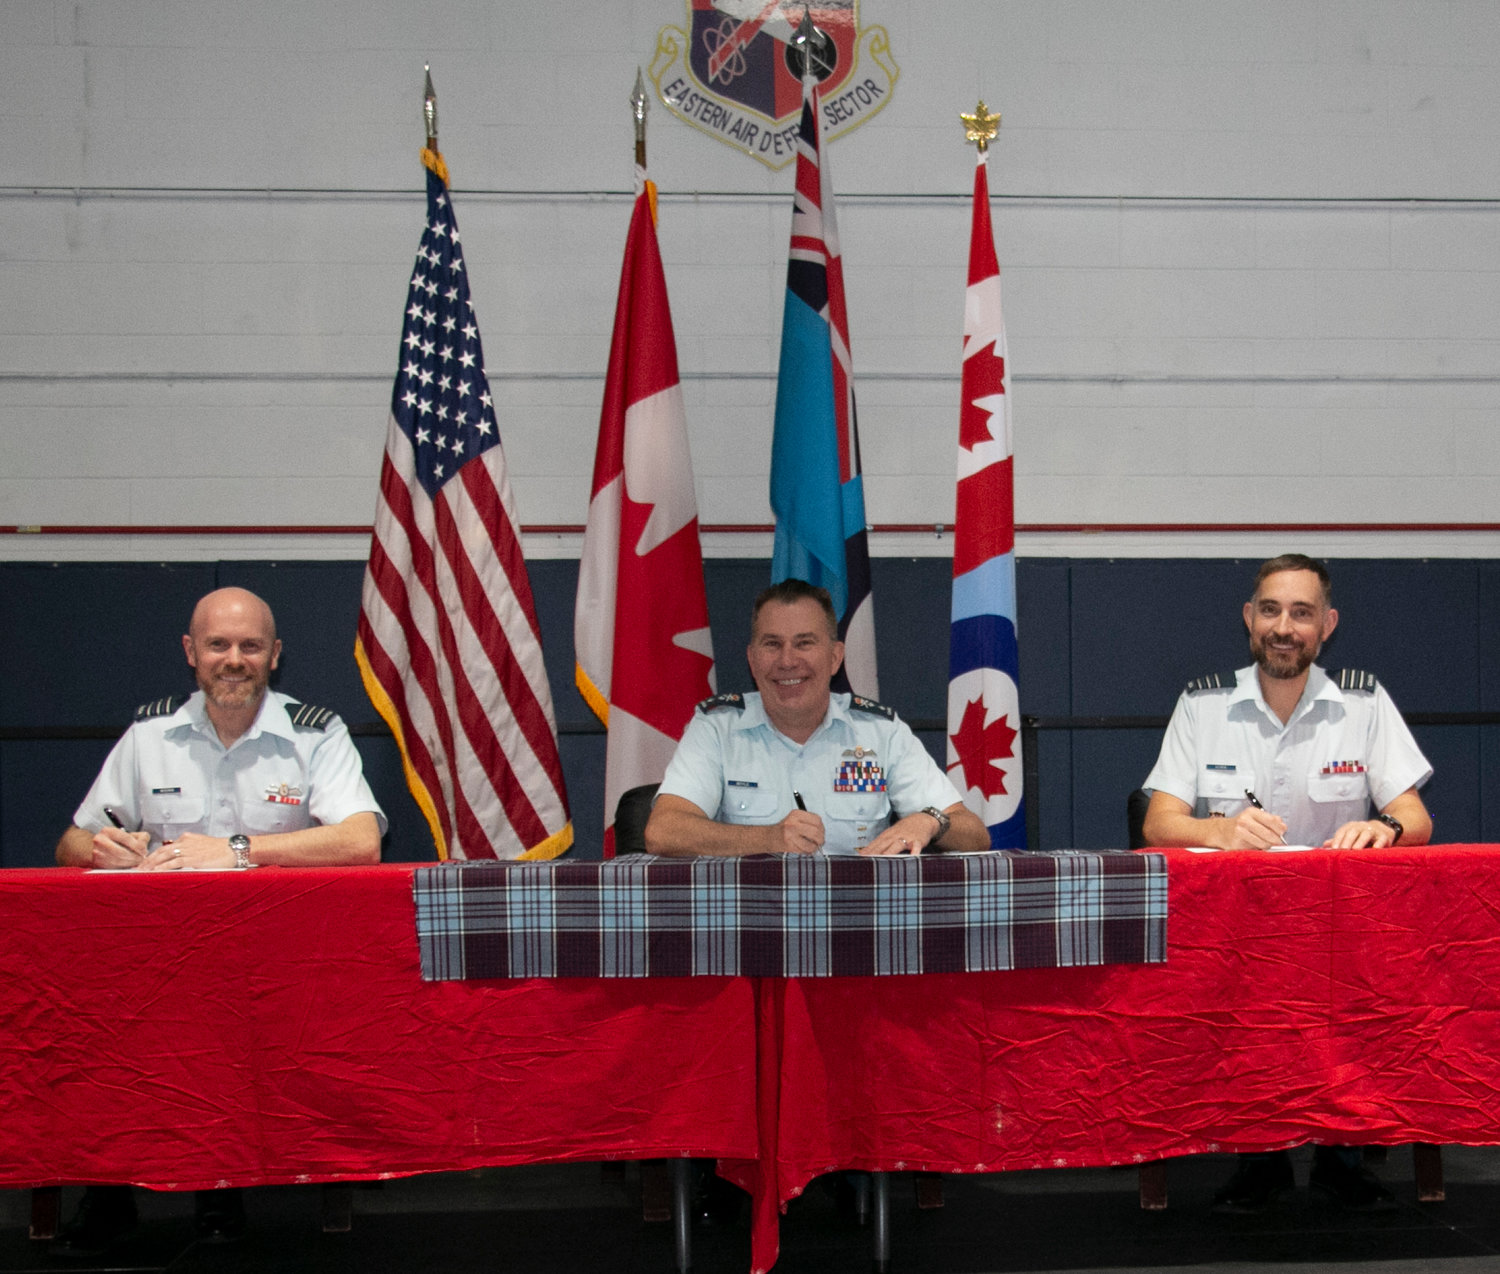 The Eastern Air Defense Sector’s Canadian Detachment held a change-of-command Thursday afternoon at the Air Force Research Laboratory’s fitness center gymnasium. Lt. Col. Michael Wiseman, left, assumed command from Lt. Col. Josh Klemen, right, during a signing ceremony, which is a long-standing tradition in the Canadian military. Royal Canadian Air Force Maj. Gen. Sean T. Boyle, the deputy commander, Continental U.S. NORAD Region (CONR) is seated in the center and was the ceremony’s presiding officer.